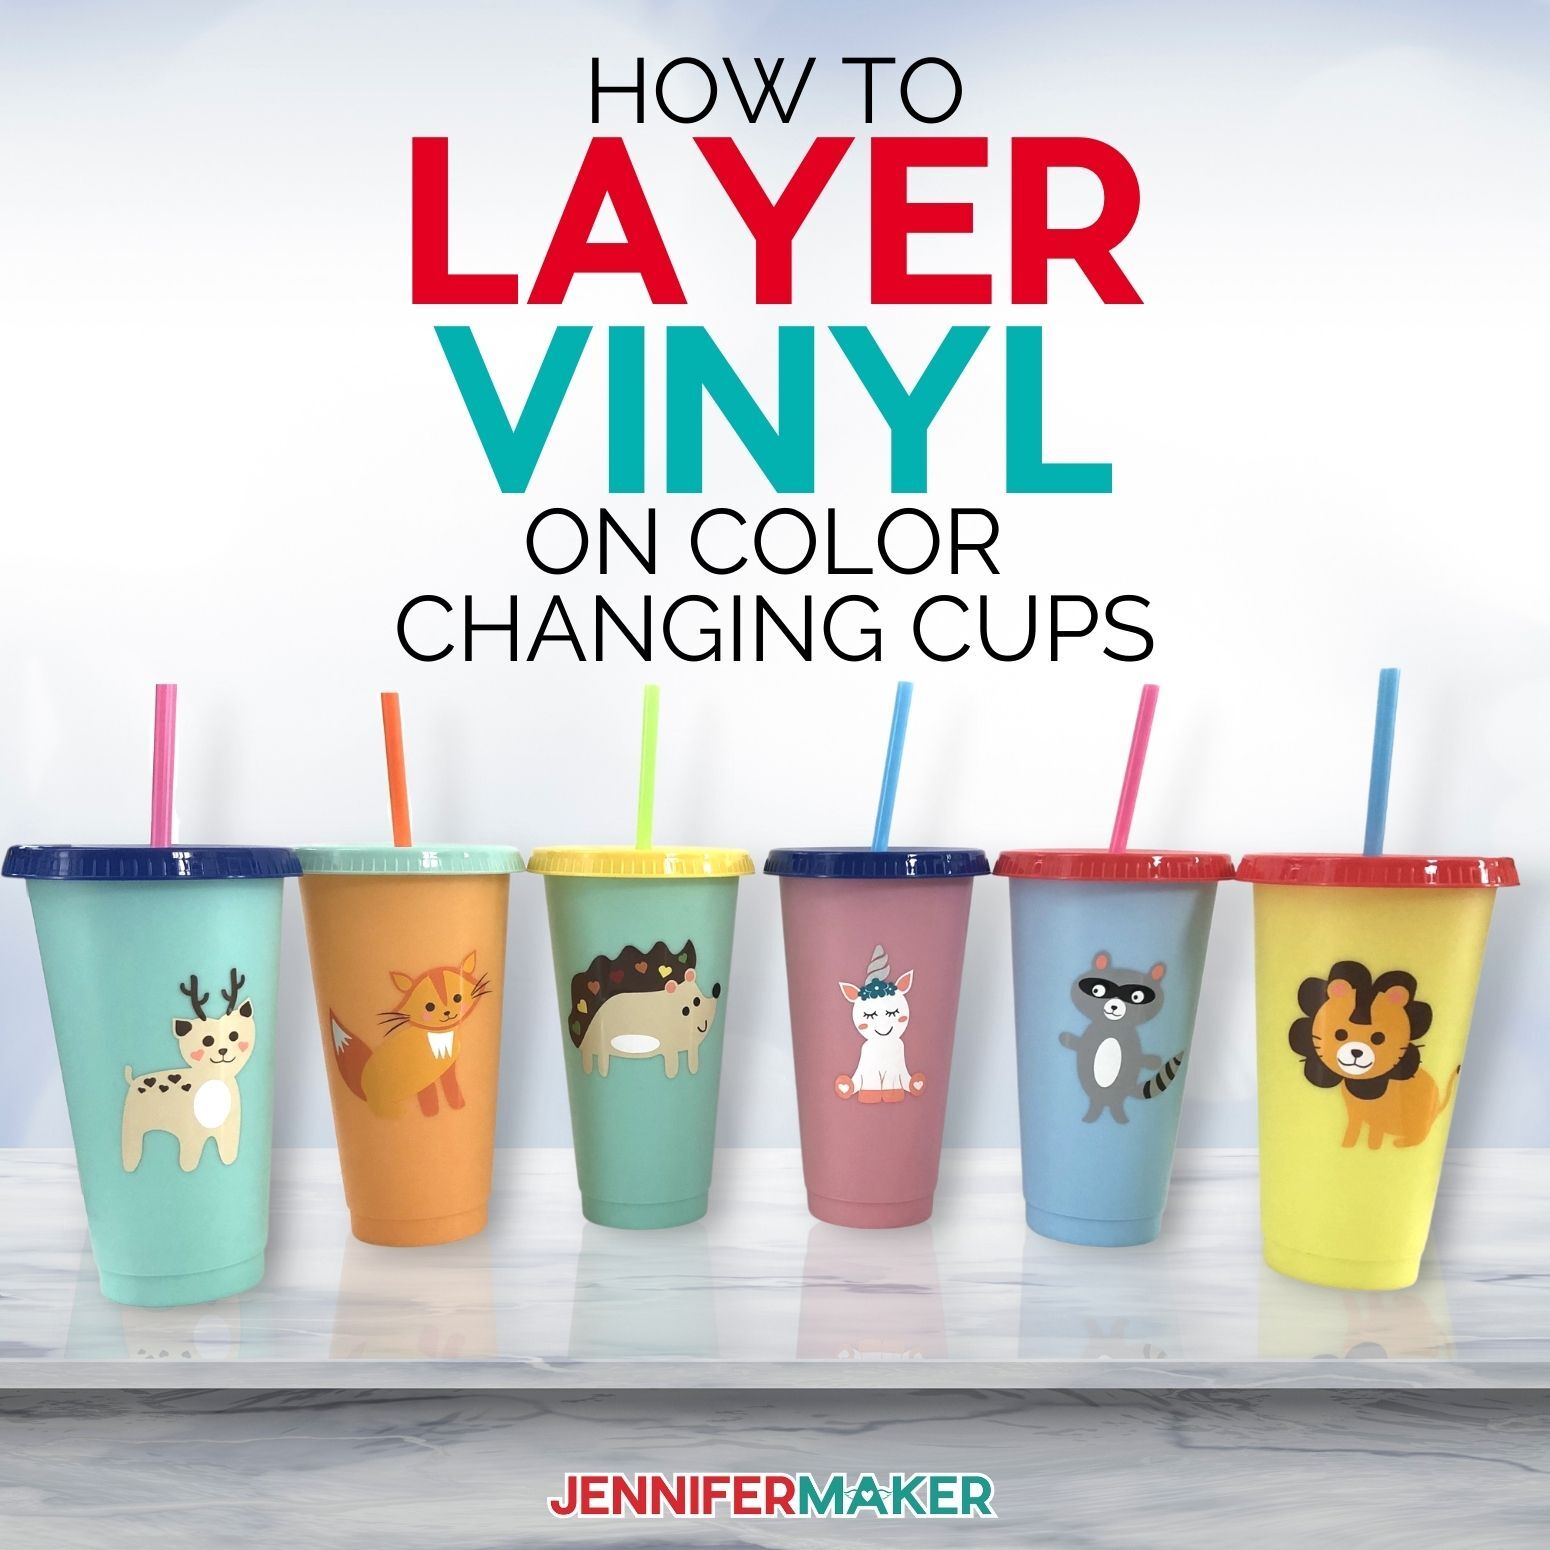 Color changing cups with layered vinyl designs